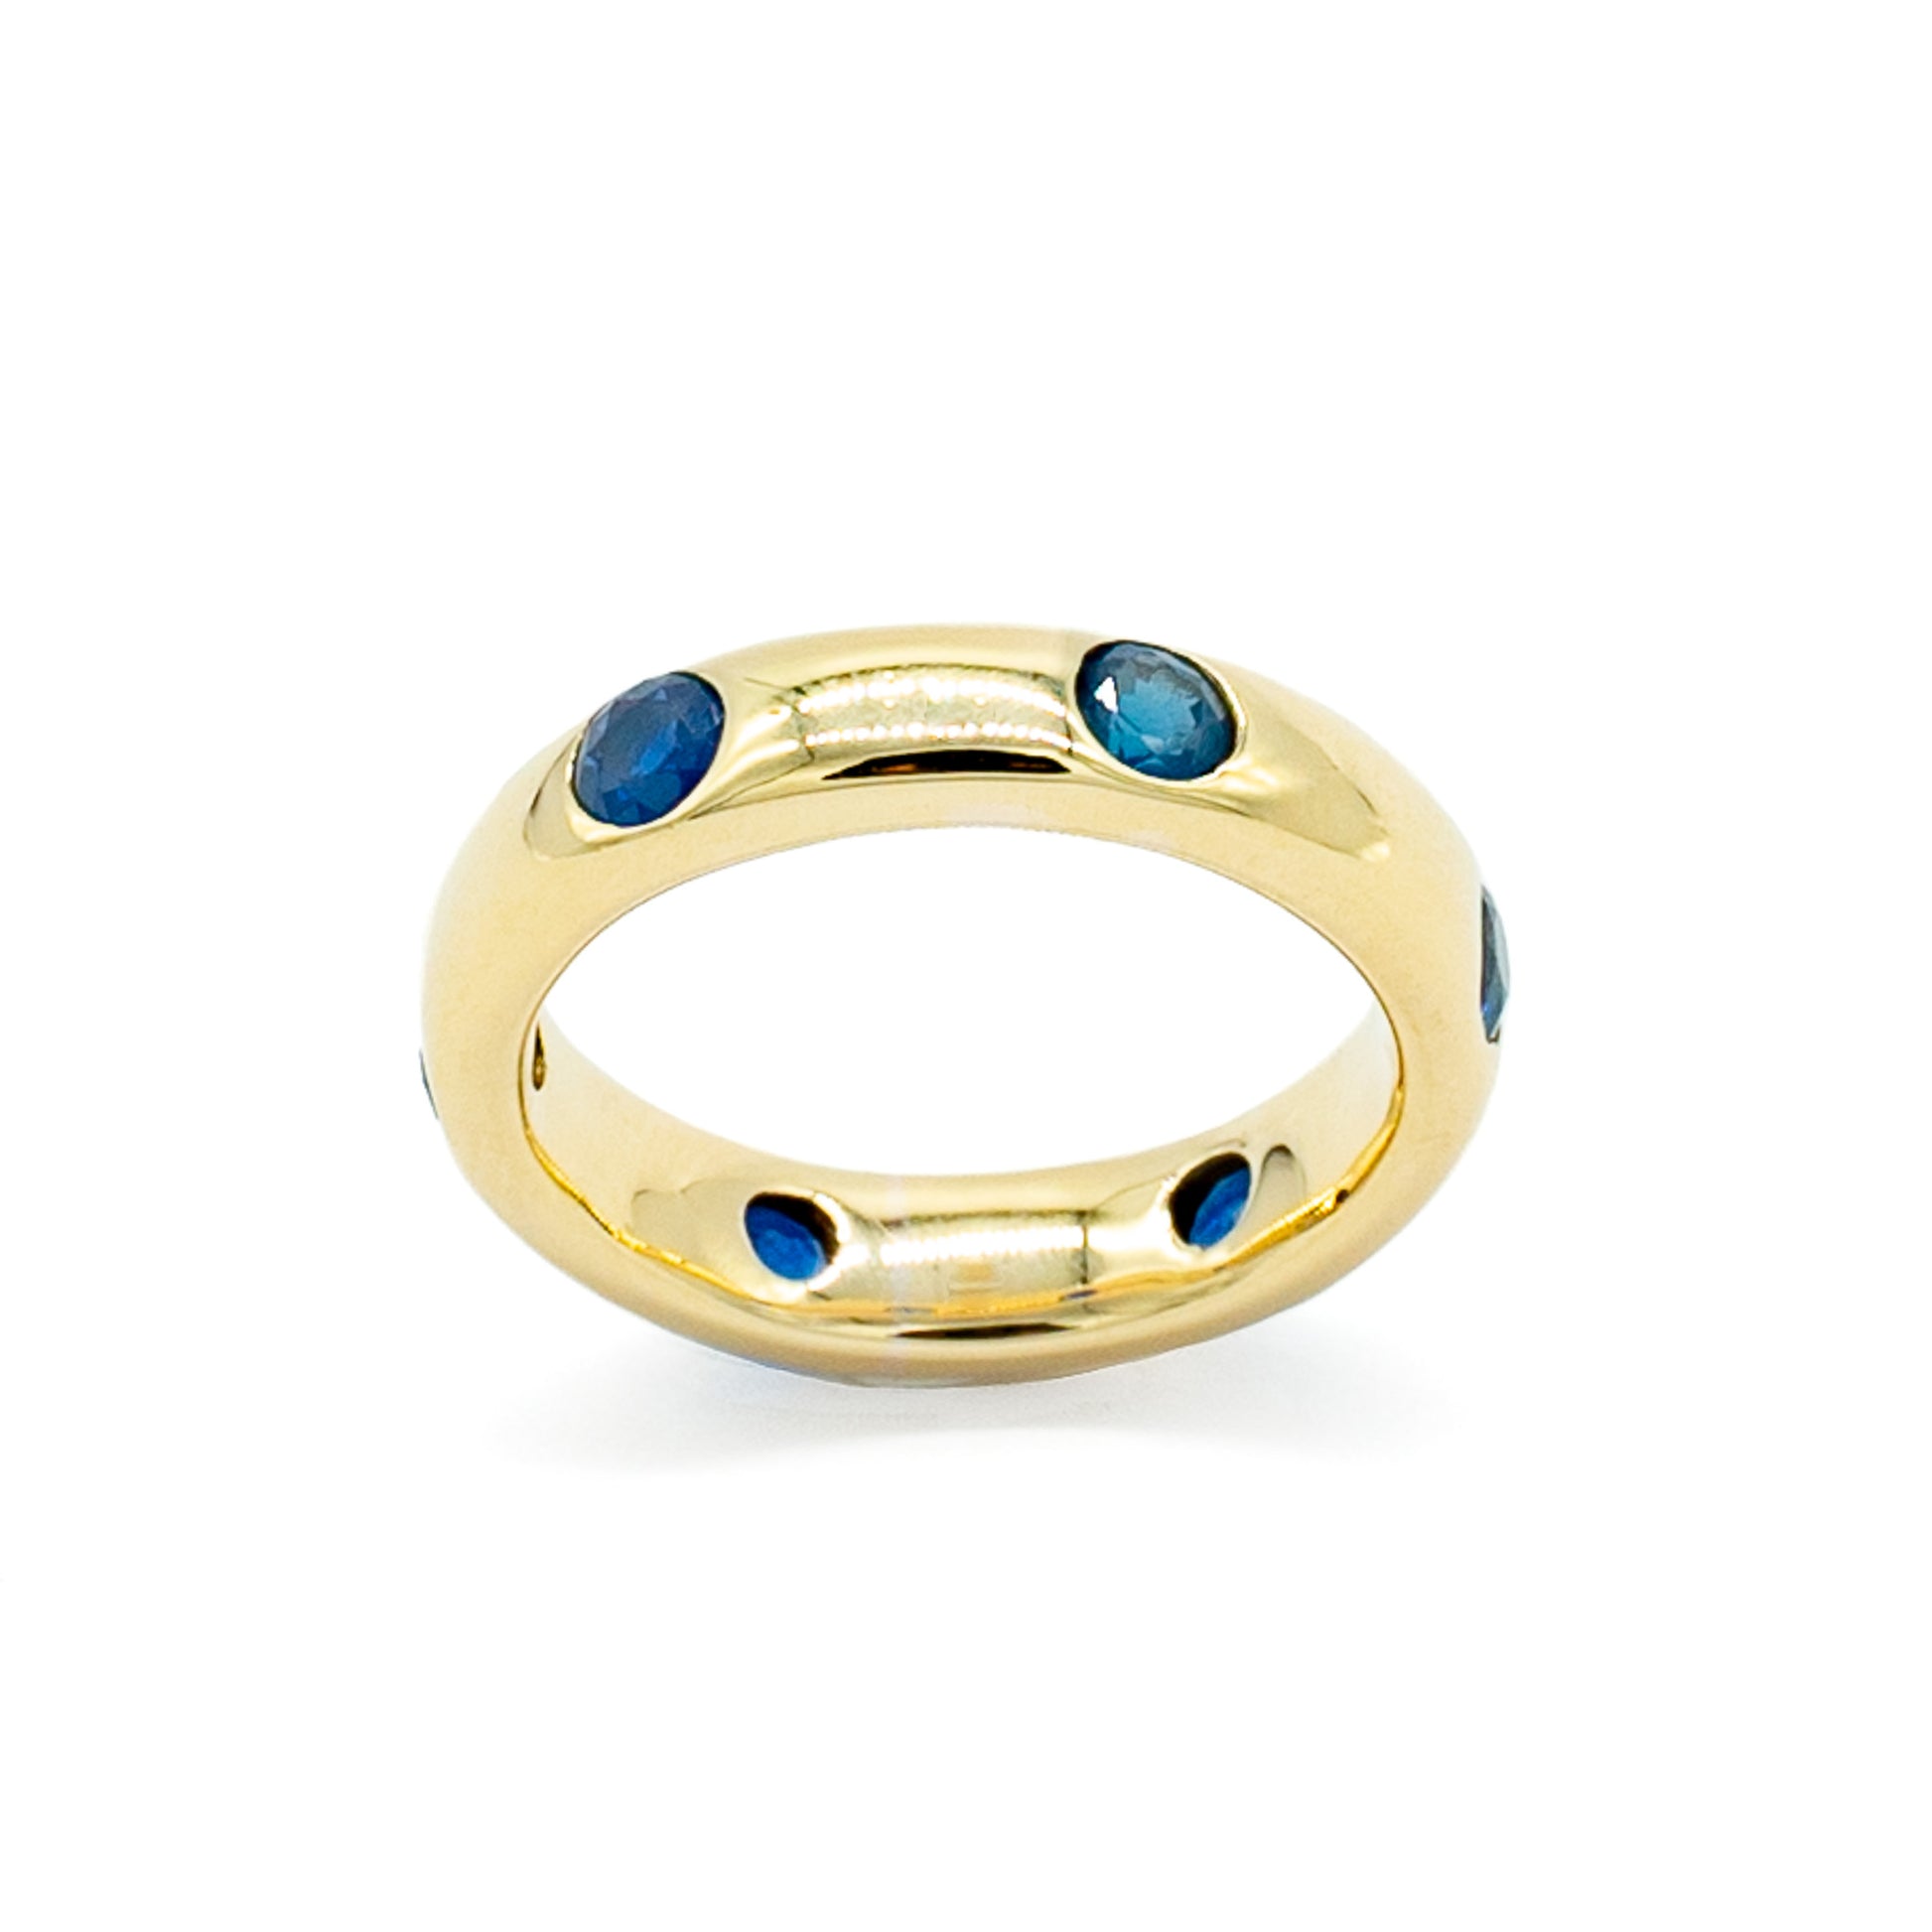 Stunning 12ct gold eternity ring set with six beautiful blue faceted sapphires.